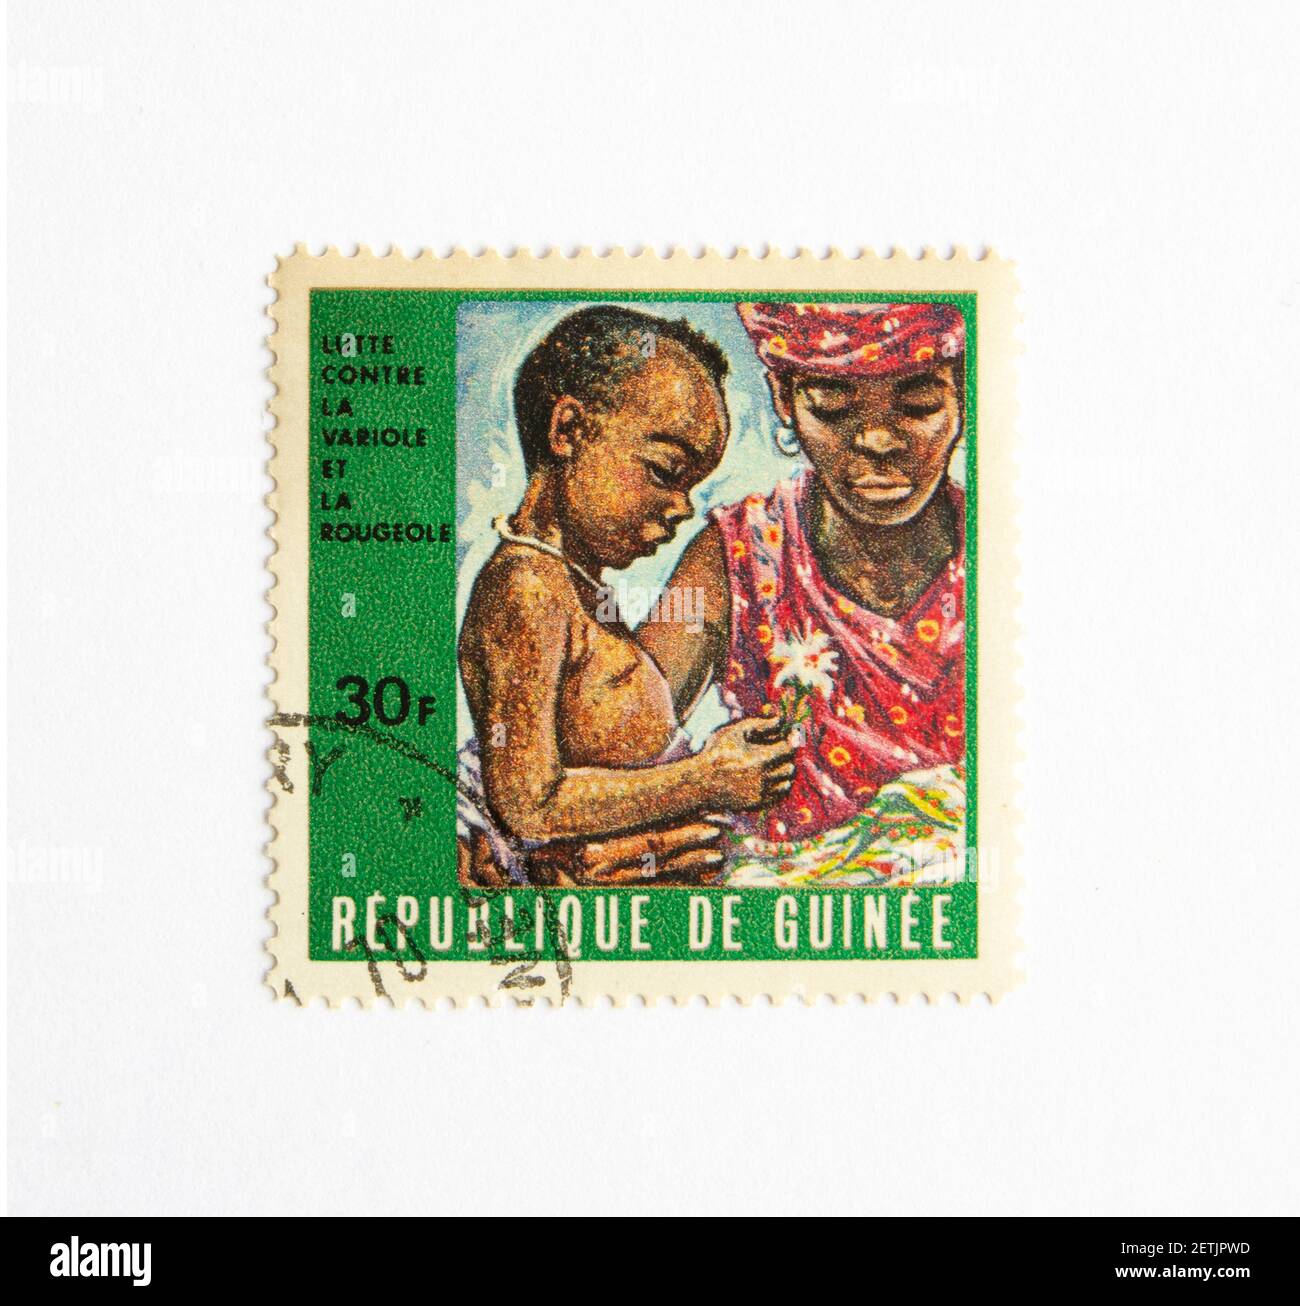 01.03.2021 Istanbul Turkey. Guinea Republic Postage Stamp. circa 1972. The fight for measles and smallpox control. vaccination baby Stock Photo